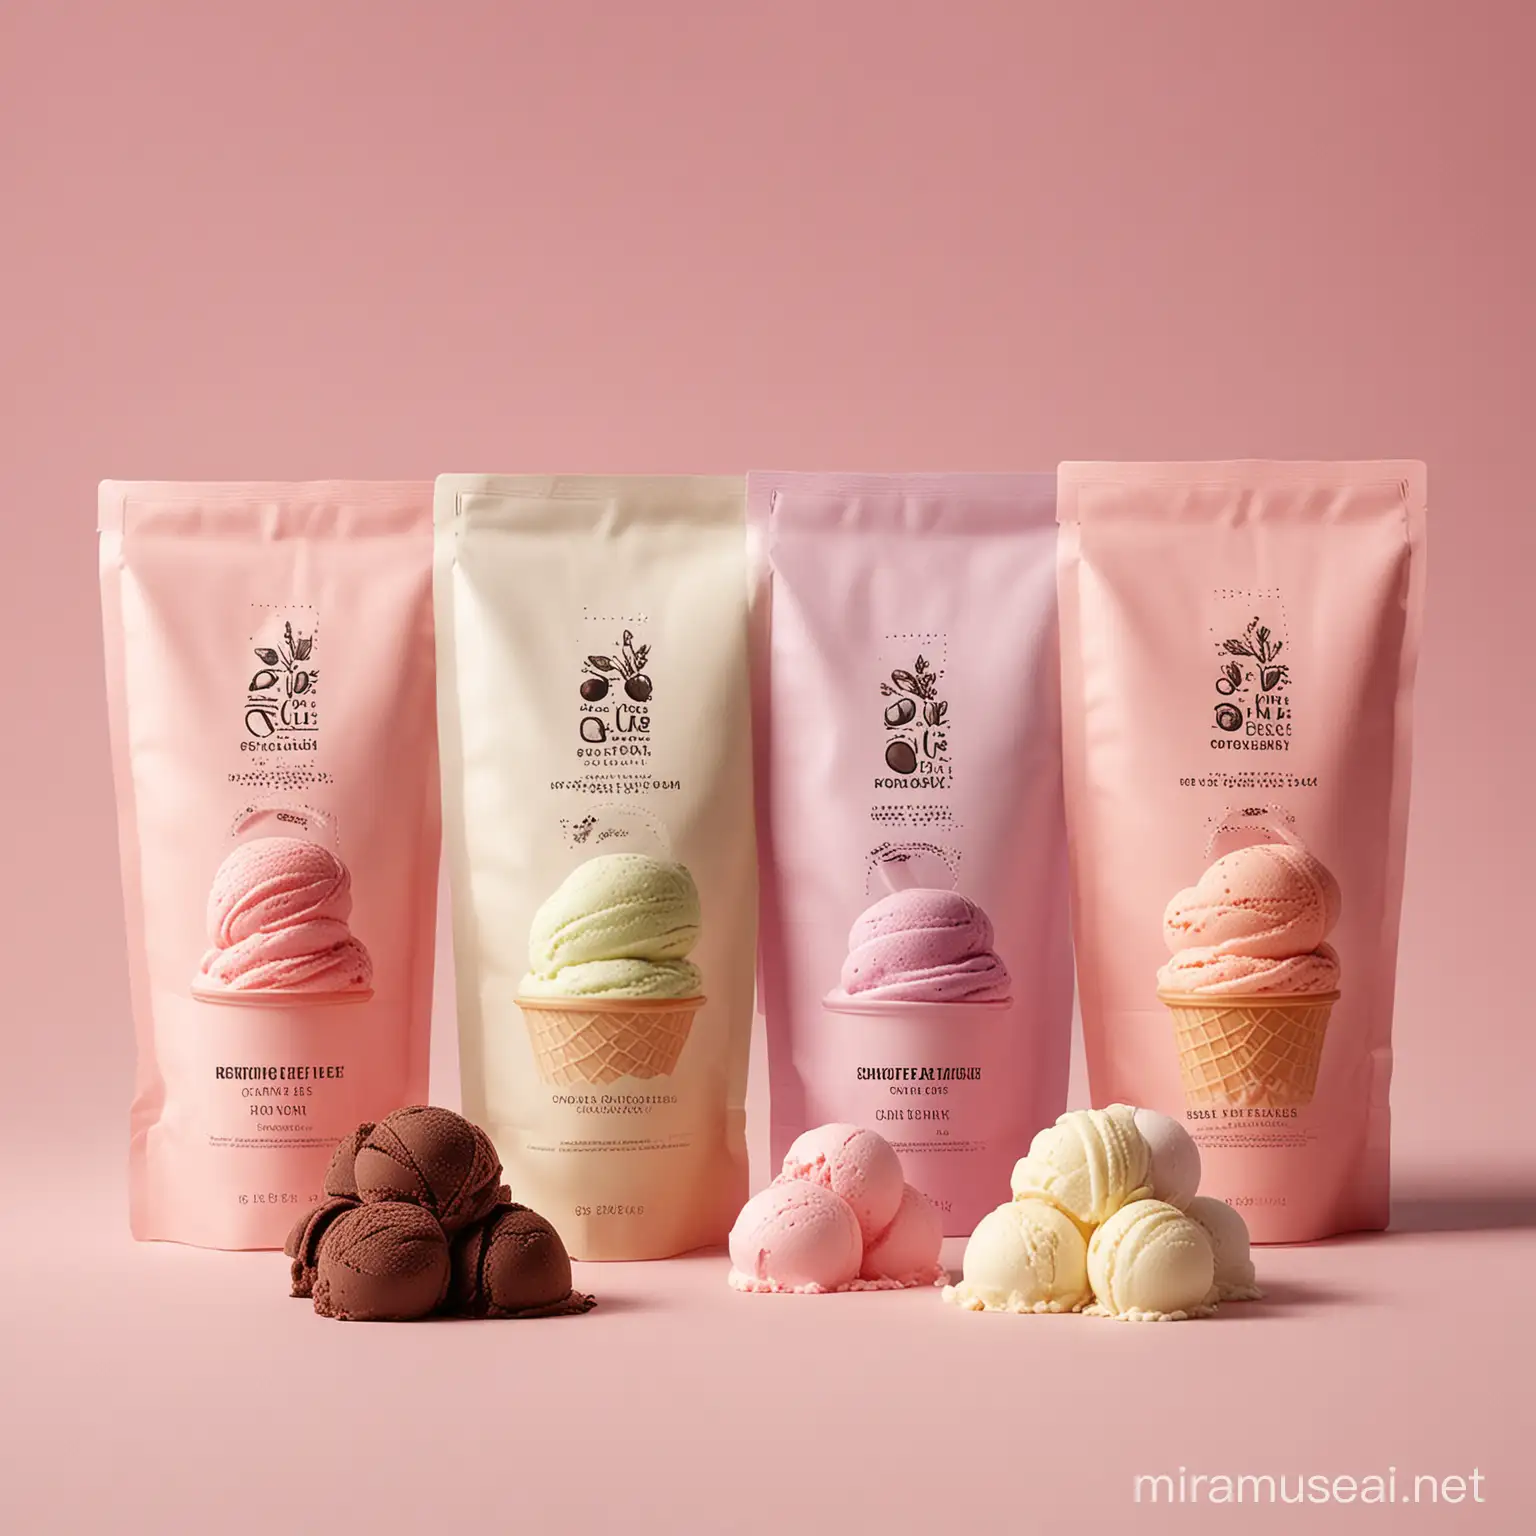 QYPremium Soft Ice Cream Powder Pouches with Flavorful Cups on Pink Background